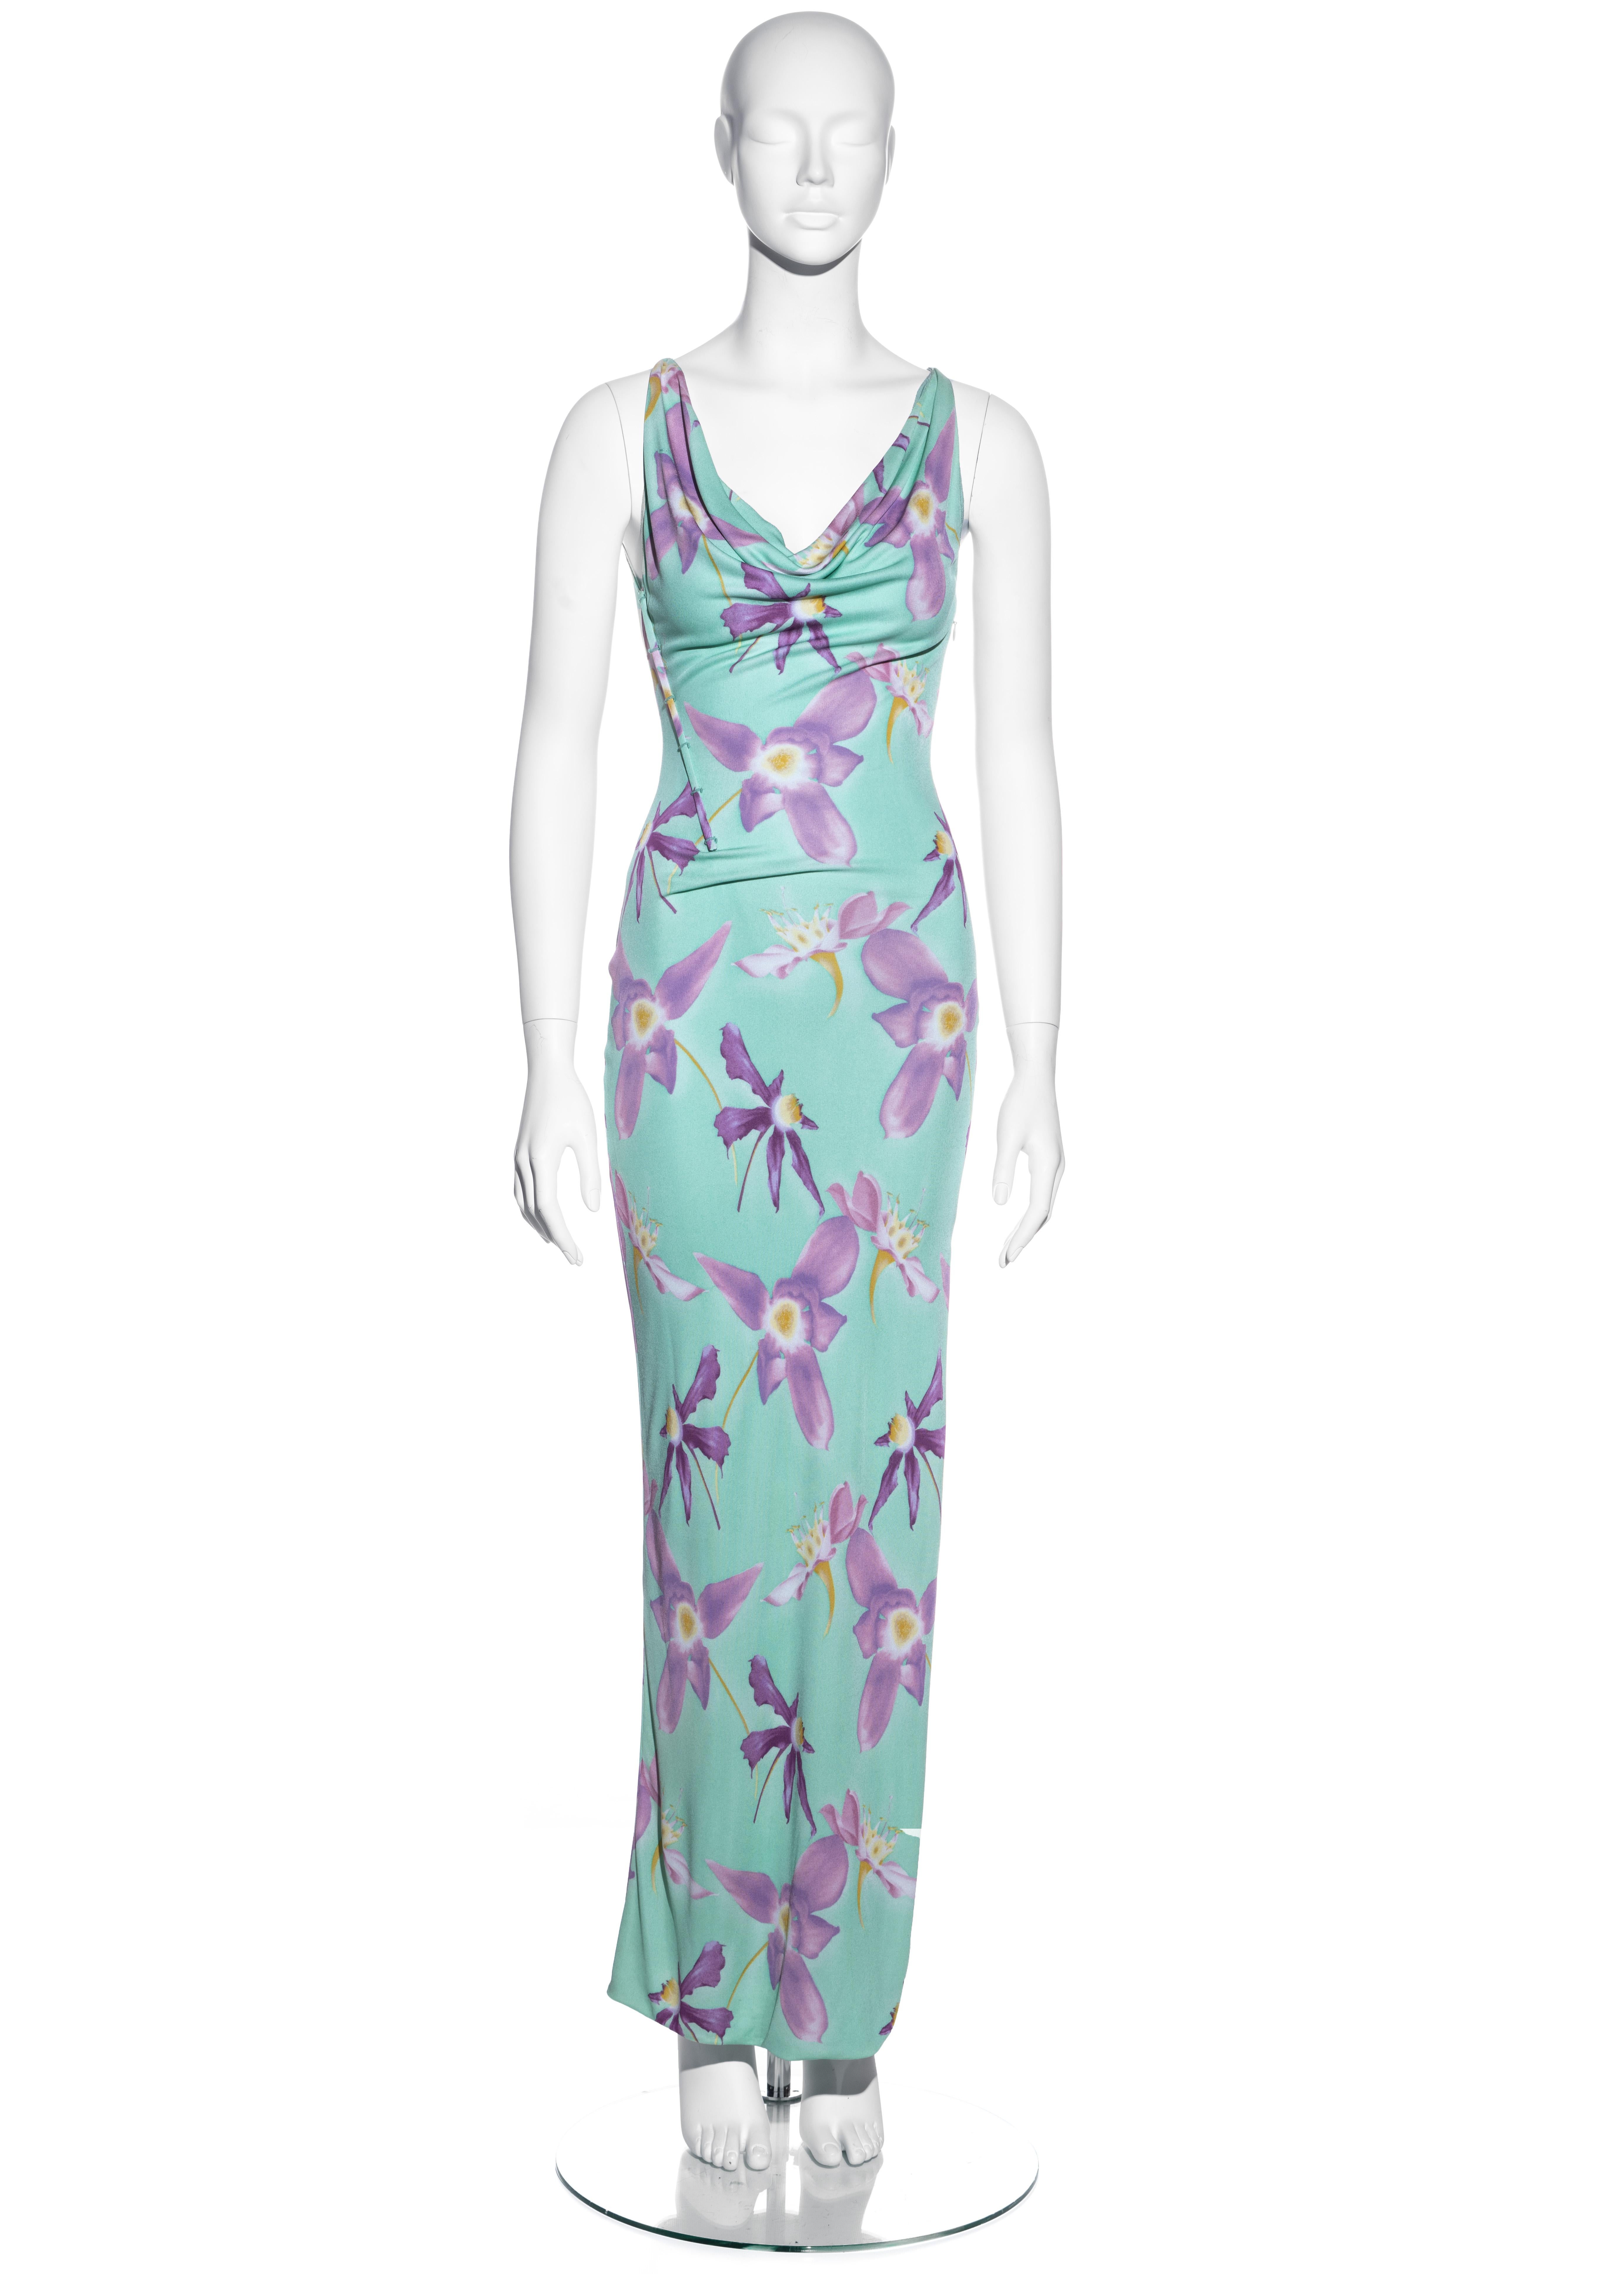 ▪ Gianni Versace turquoise orchid print maxi dress
▪ 62% Rayon, 25% Acetate, 13% Nylon
▪ Cowl neck
▪ External corsetry boning on right side
▪ High leg slit on left side
▪ IT 38 - FR 34 - UK 6 - US 2
▪ Spring-Summer 1999